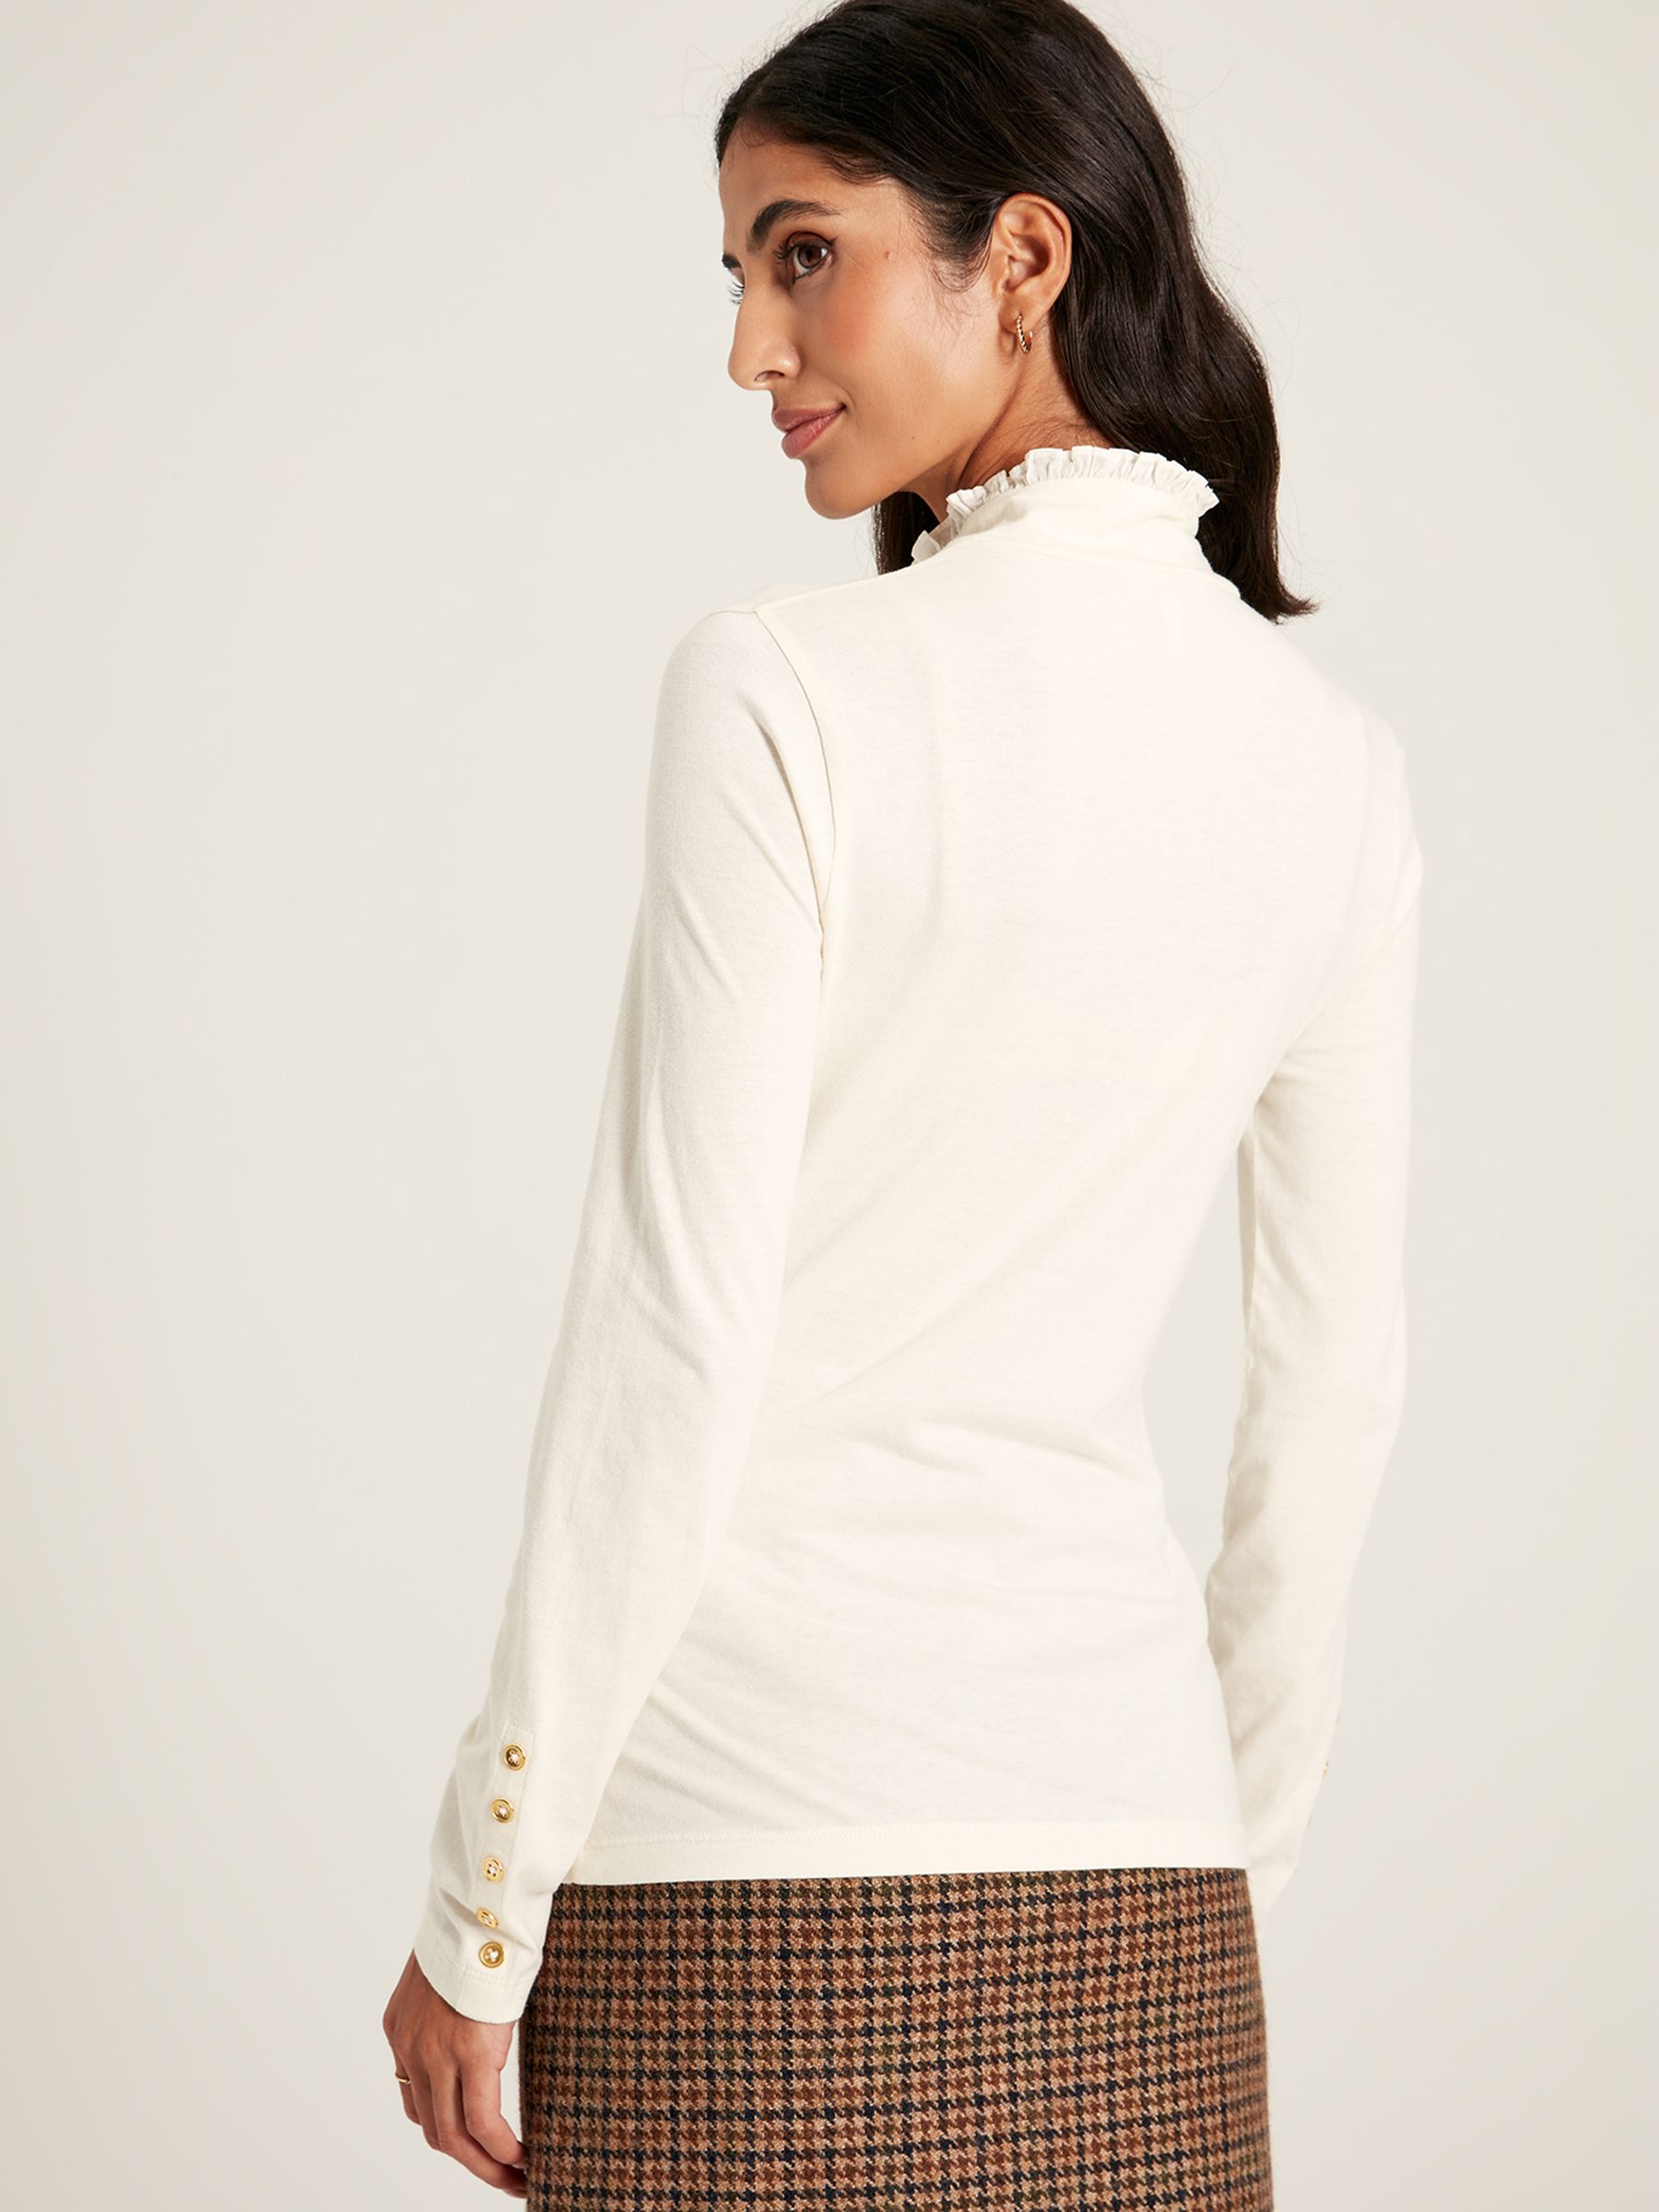 Buy Amy Cream Long Sleeve High Neck Jersey Top from the Joules online shop